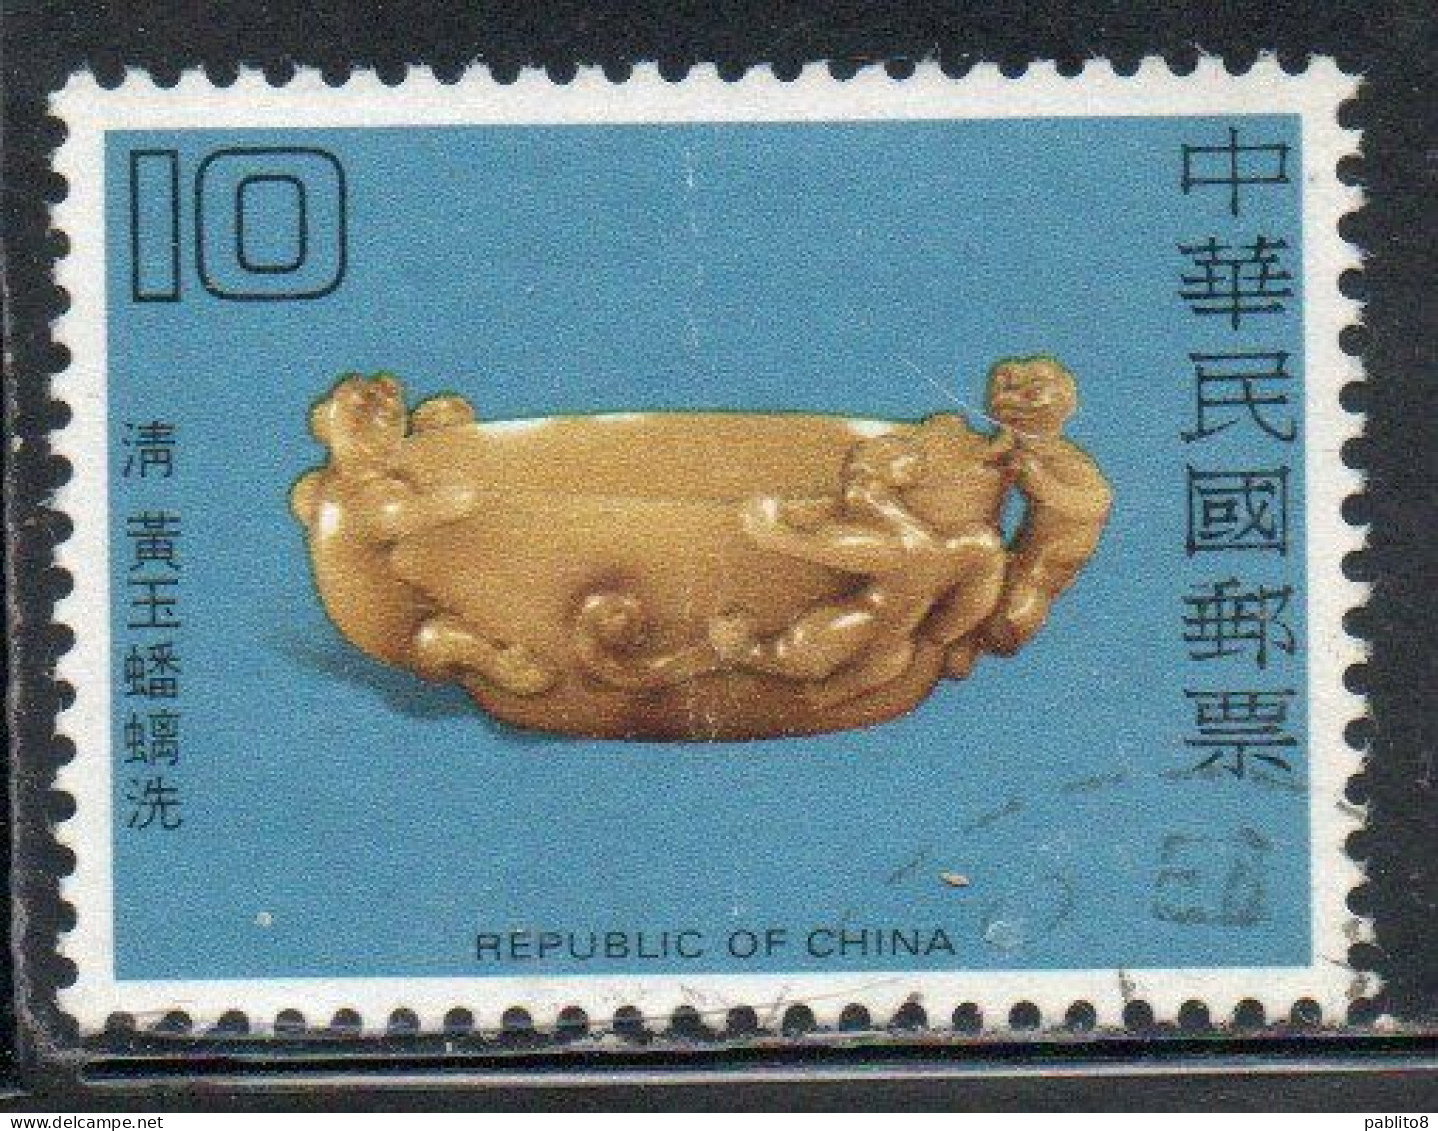 CHINA REPUBLIC CINA TAIWAN FORMOSA 1980 JADE POTTERY YELLOW BRUSH WASHER CH'ING DYNASTY 10$ USED USATO OBLITERE' - Oblitérés